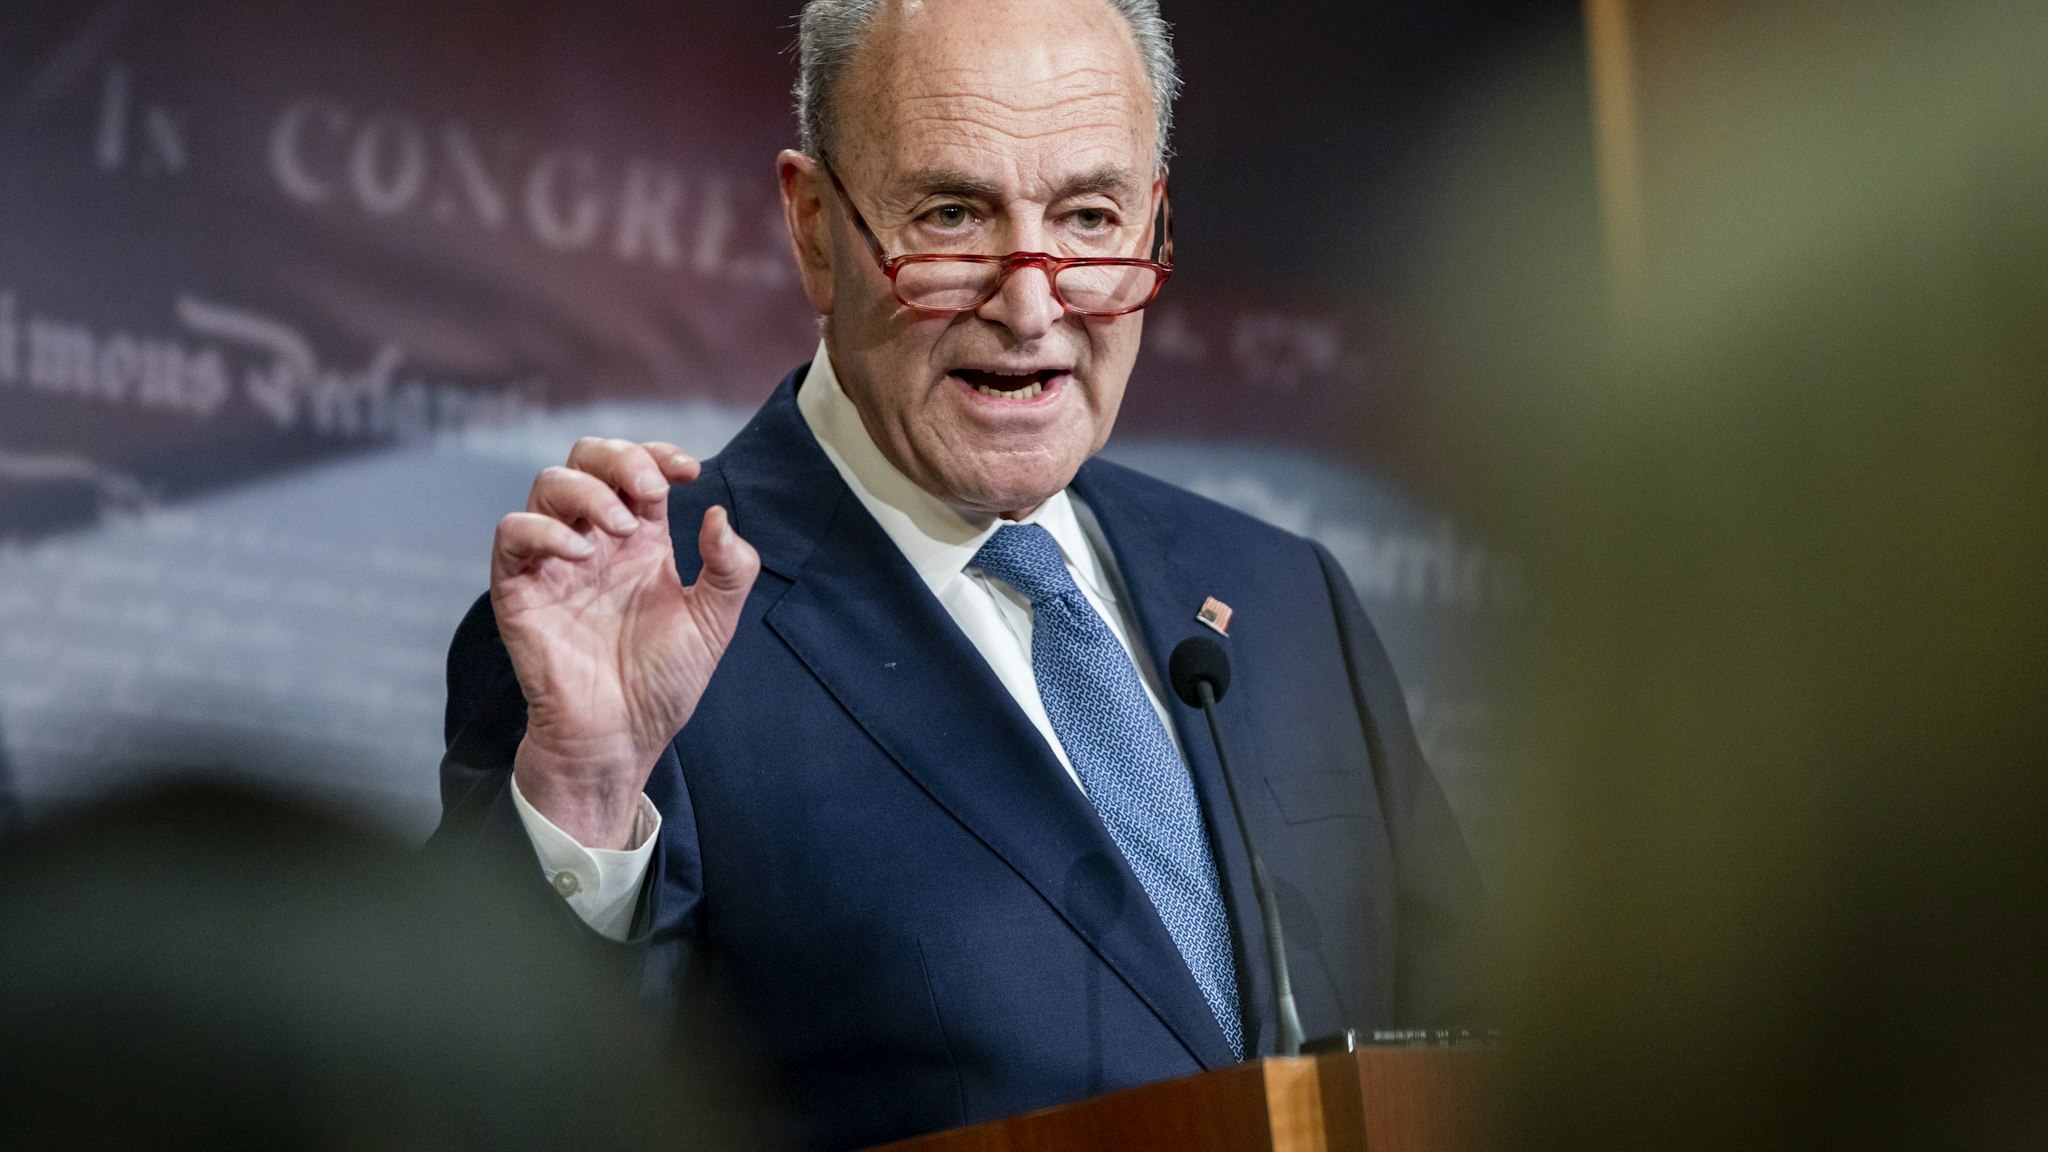 WASHINGTON, DC - DECEMBER 16: Senate Minority Leader Chuck Schumer (D-N.Y.) holds a press conference at the U.S. Capitol on December 16, 2019 in Washington, DC. Sen. Schumer criticized Majority Leader Mitch McConnell (R-Ky.) about his plans for the Impeachment trial of President Donald Trump if it passes in the House of Representatives during the press conference. (Photo by Samuel Corum/Getty Images)